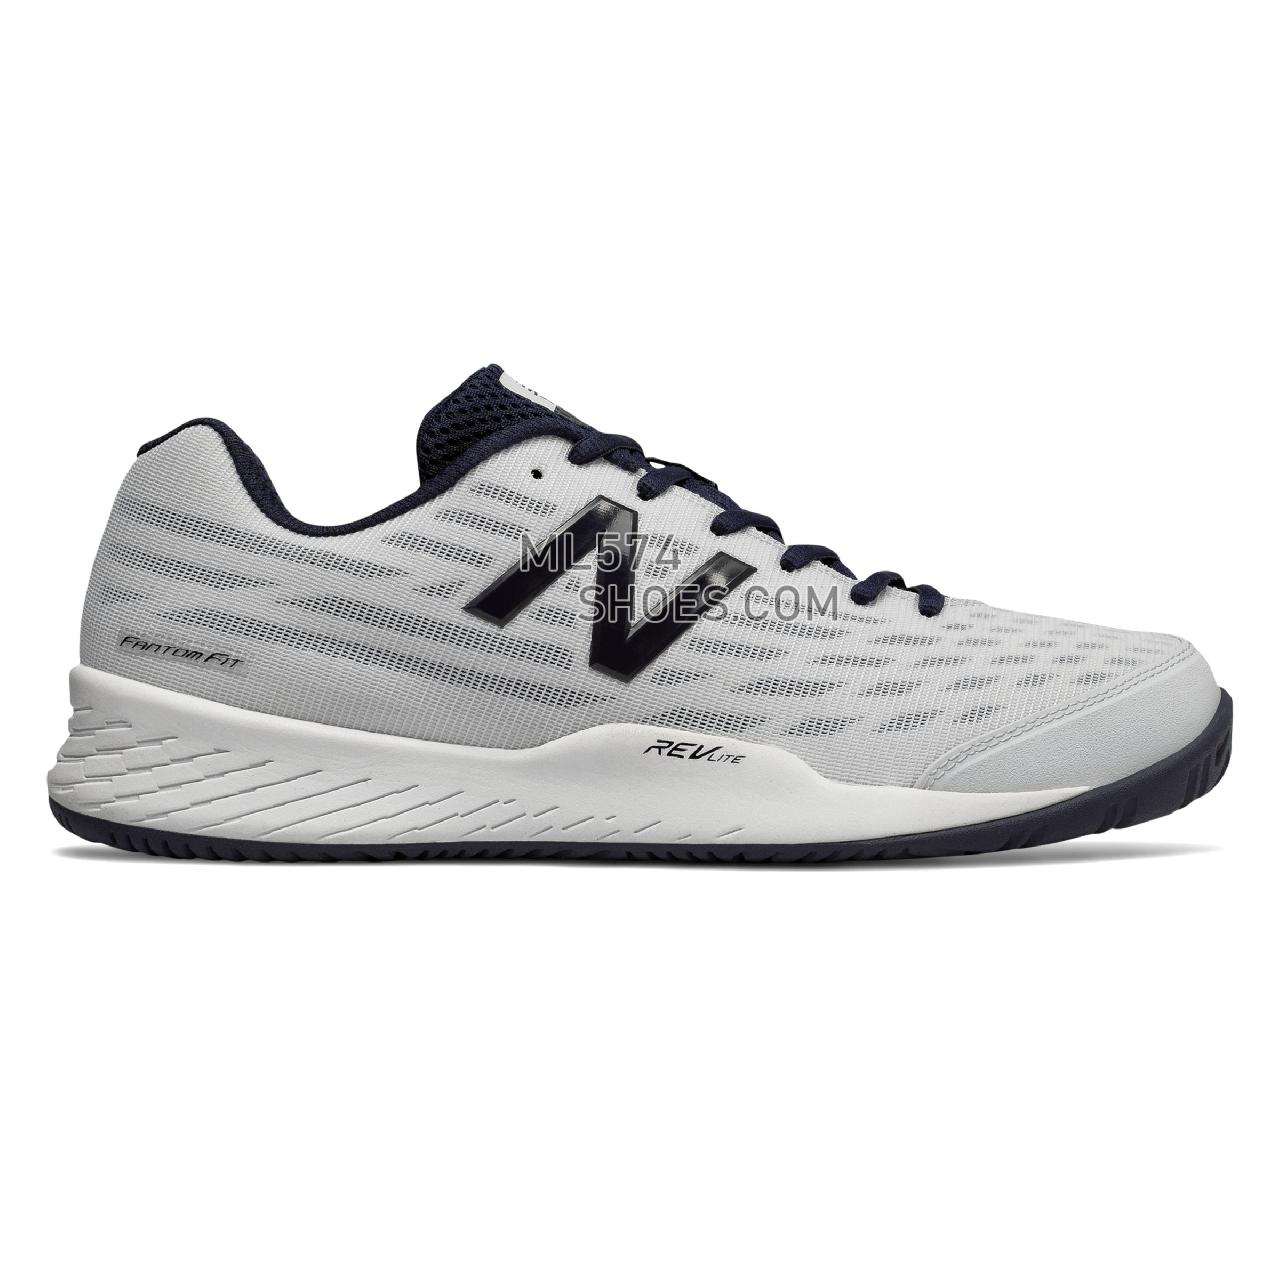 New Balance 896v2 - Men's 896 - Tennis / Court White with Navy and Black - MCH896W2